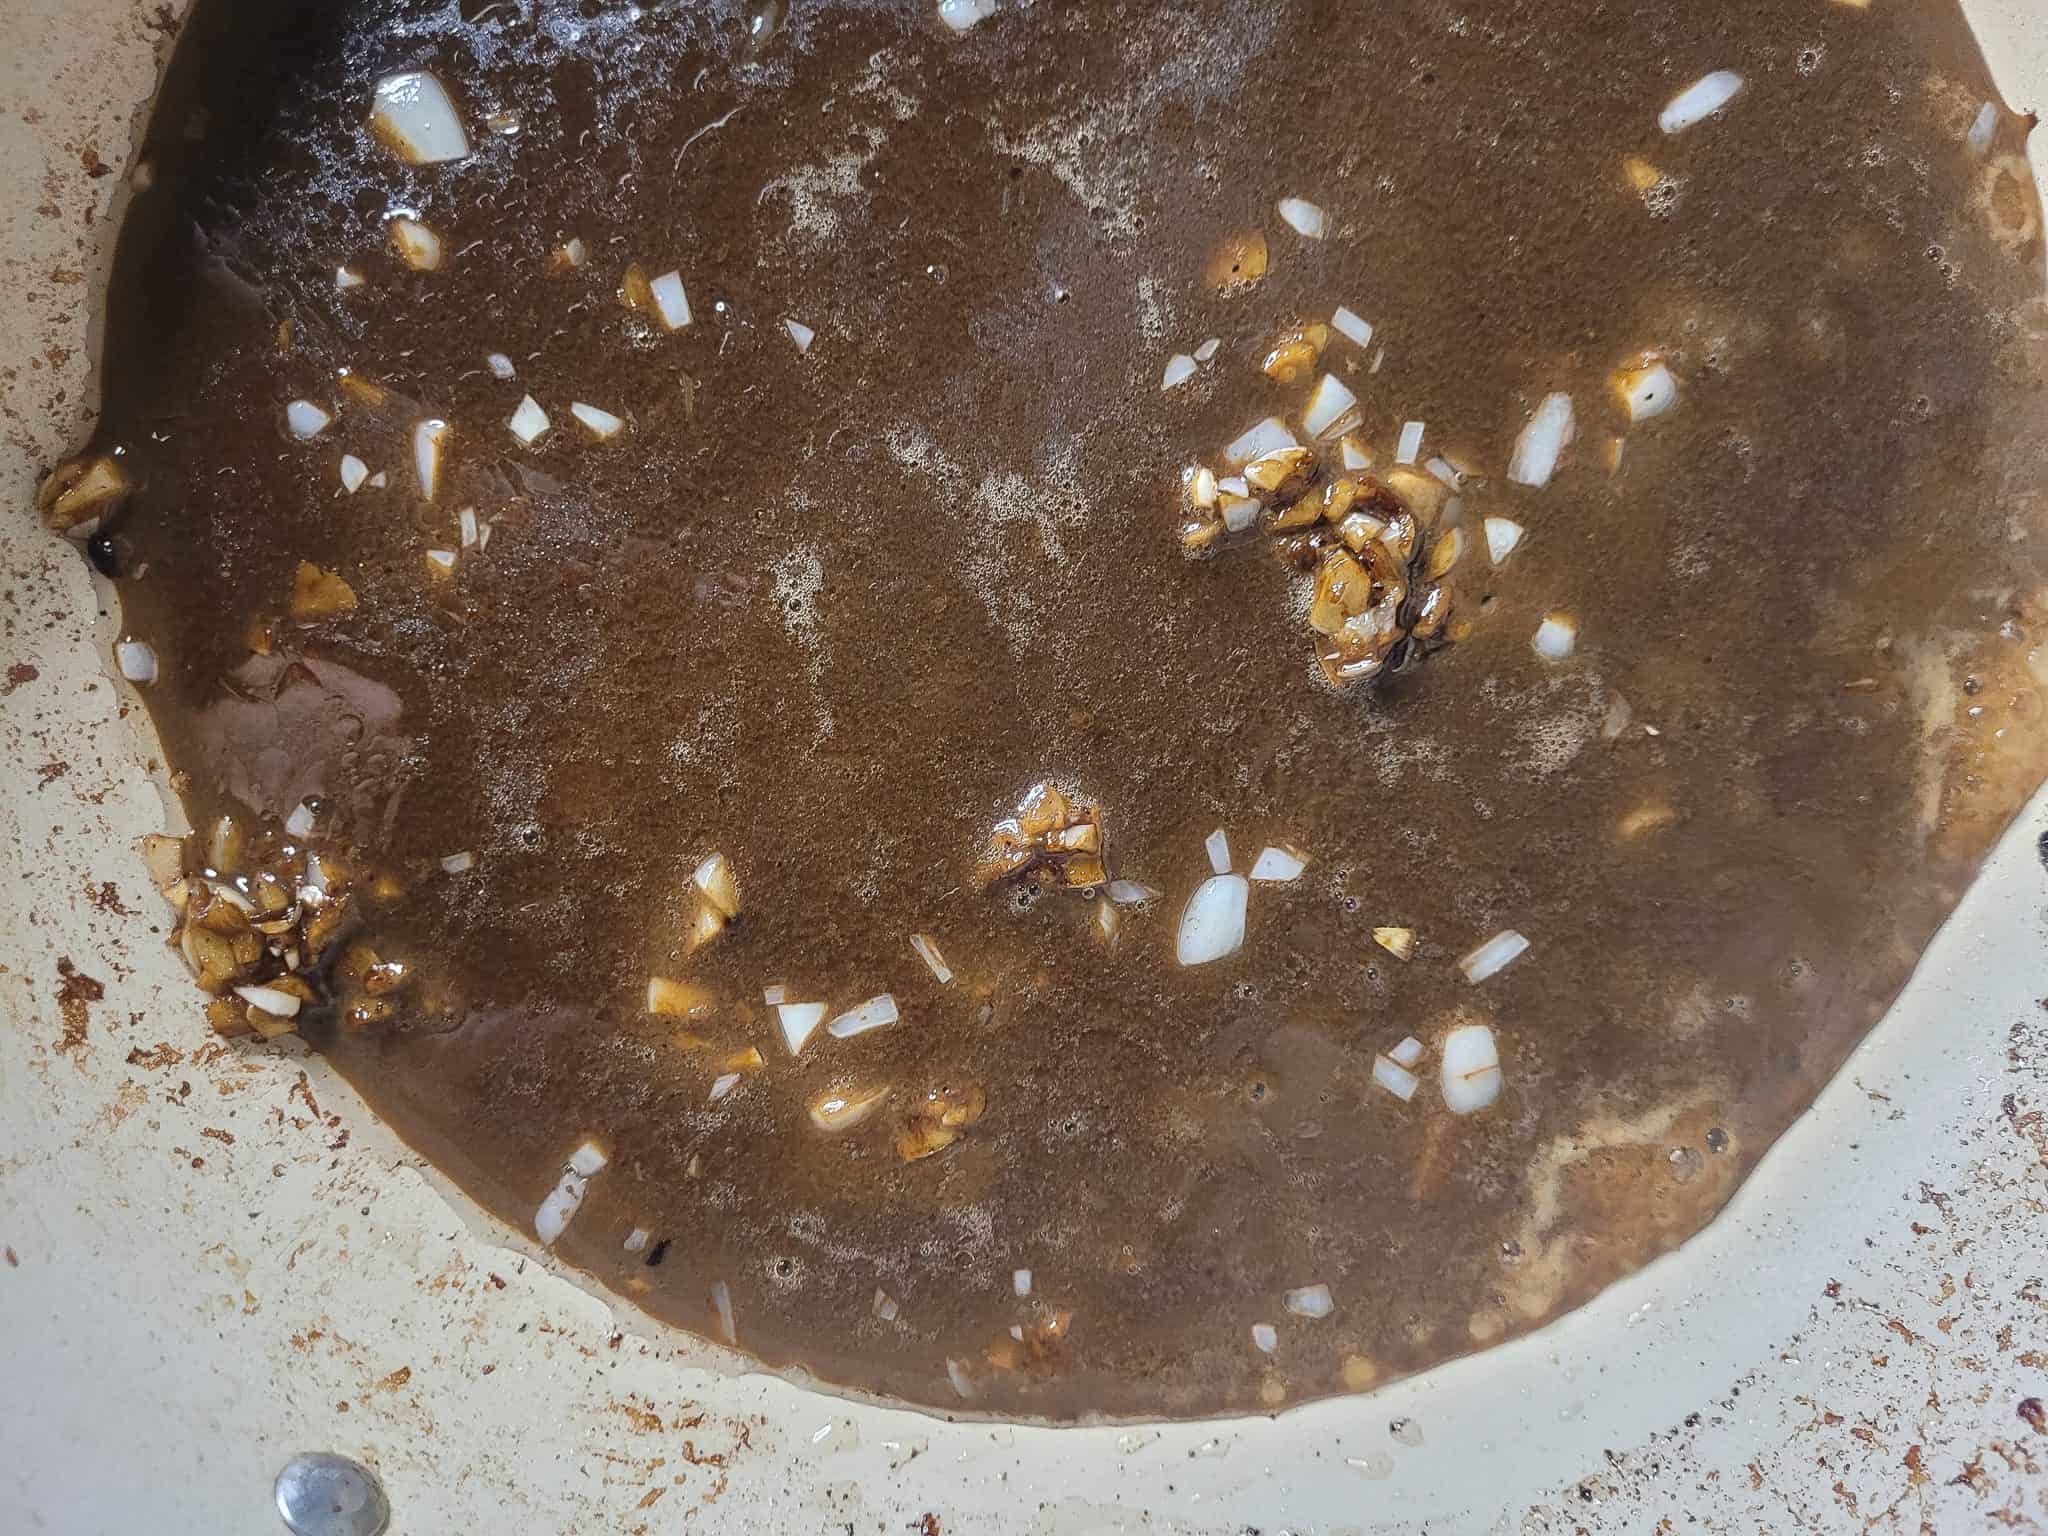 Sauteed garlic in a pan cooked with a brown sauce